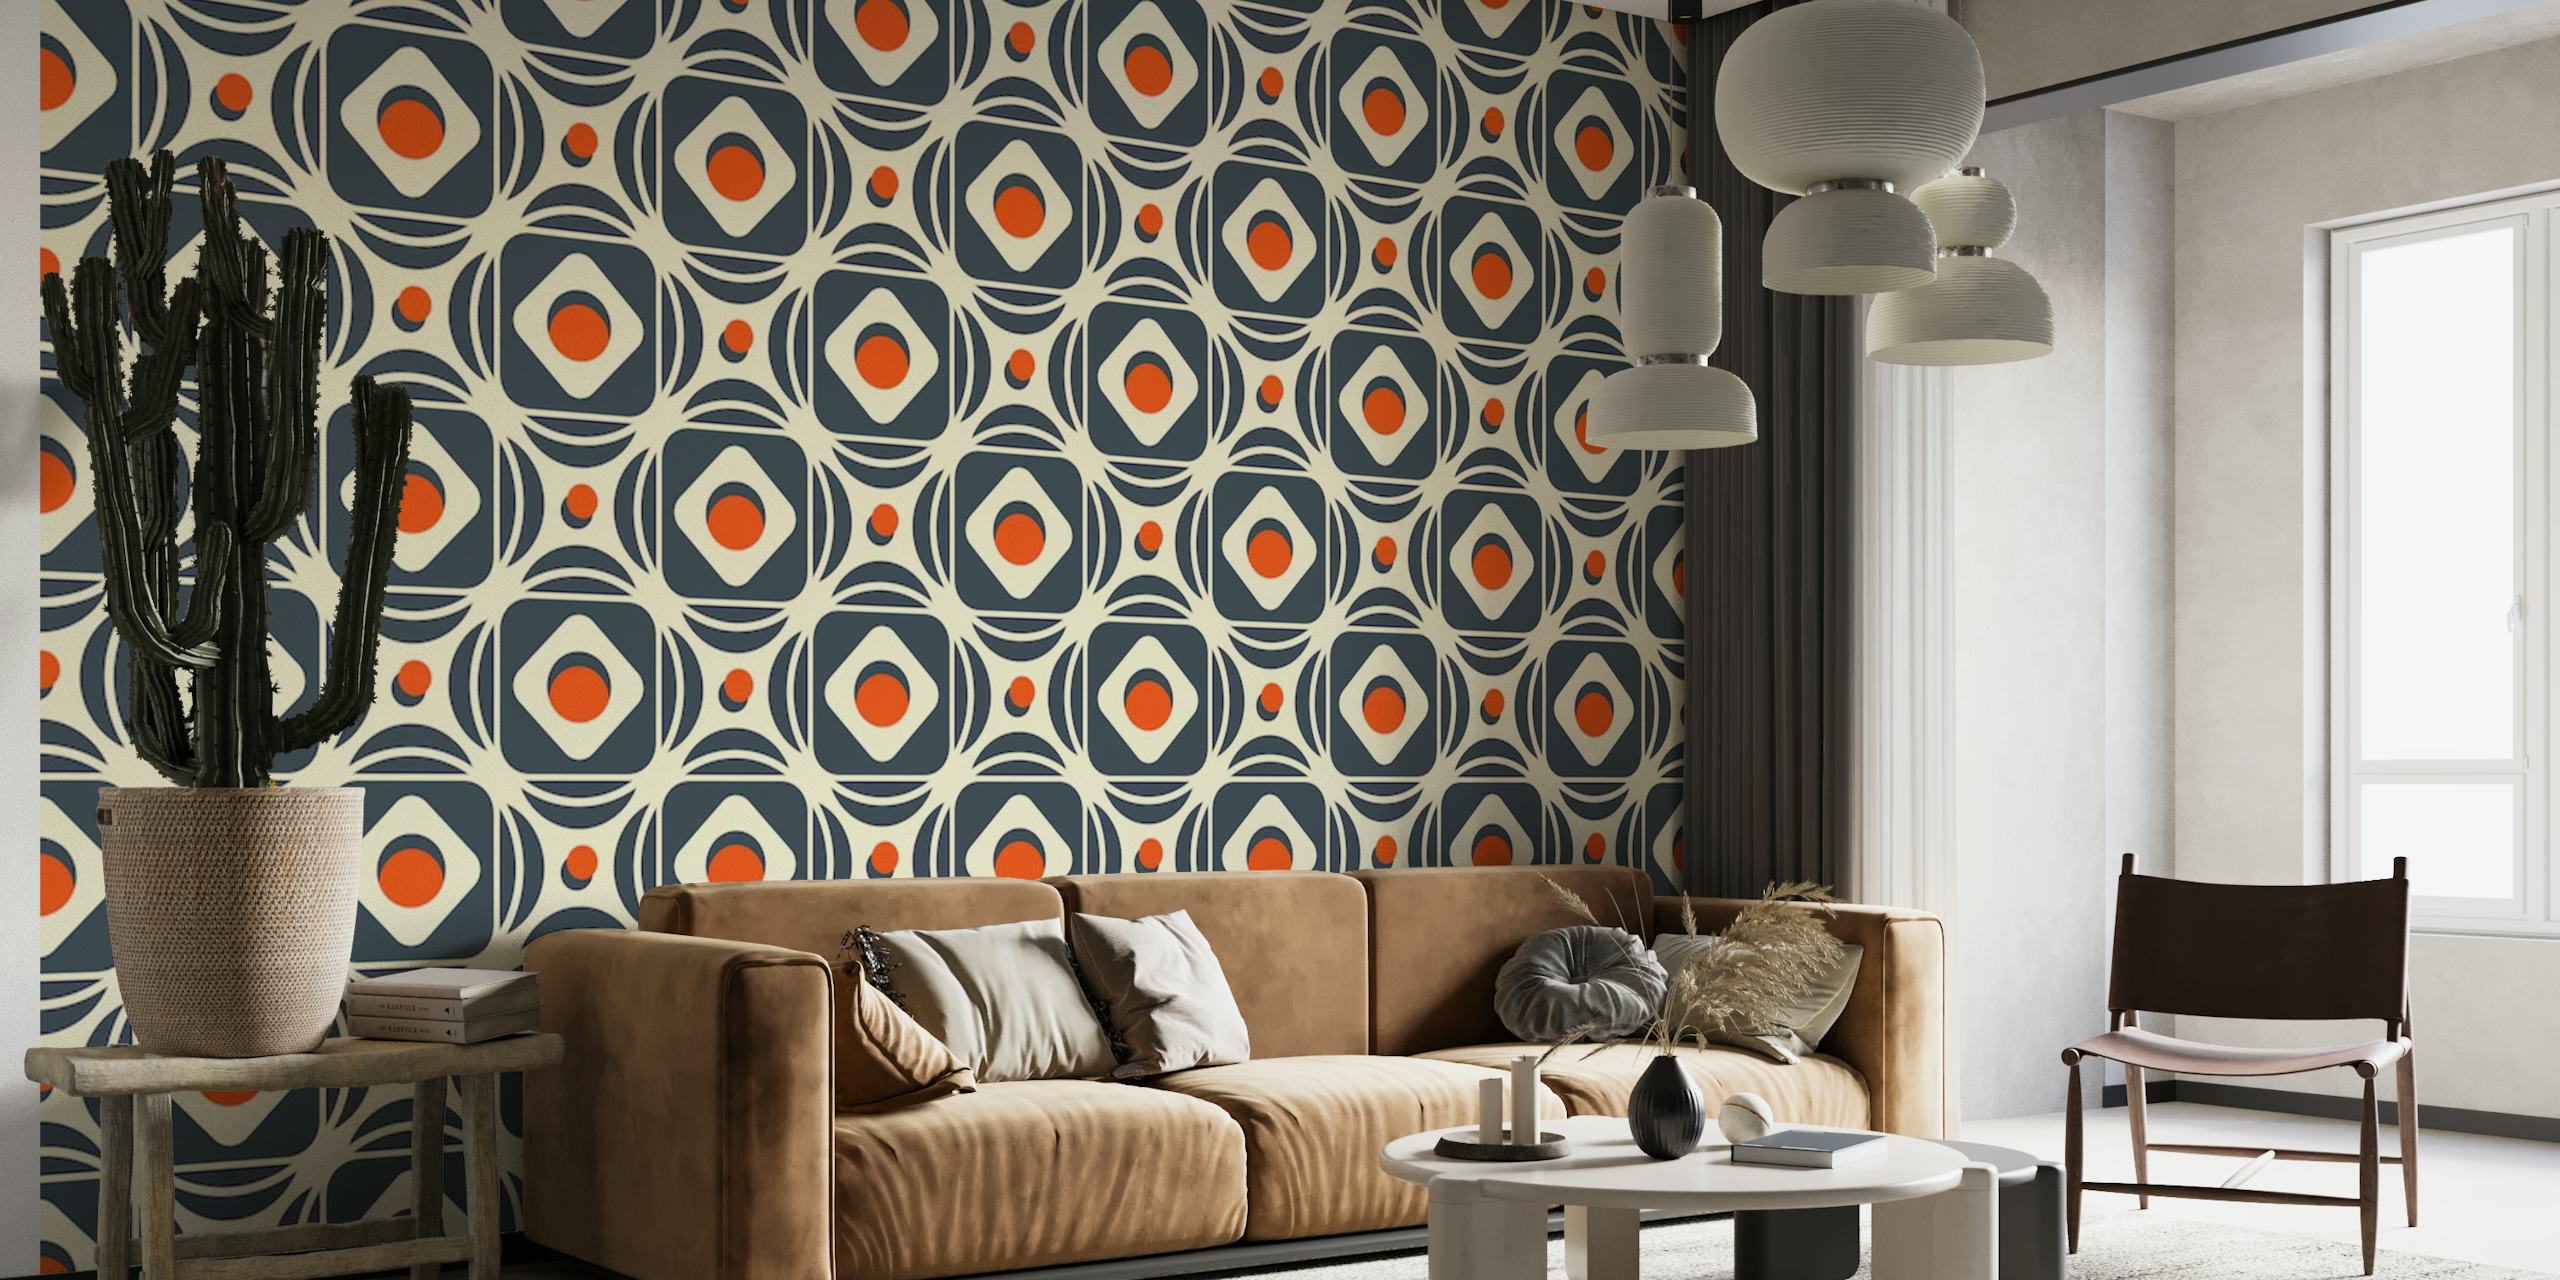 2184 Abstract Geometric wall mural with a complex pattern of shapes and contrasting colors